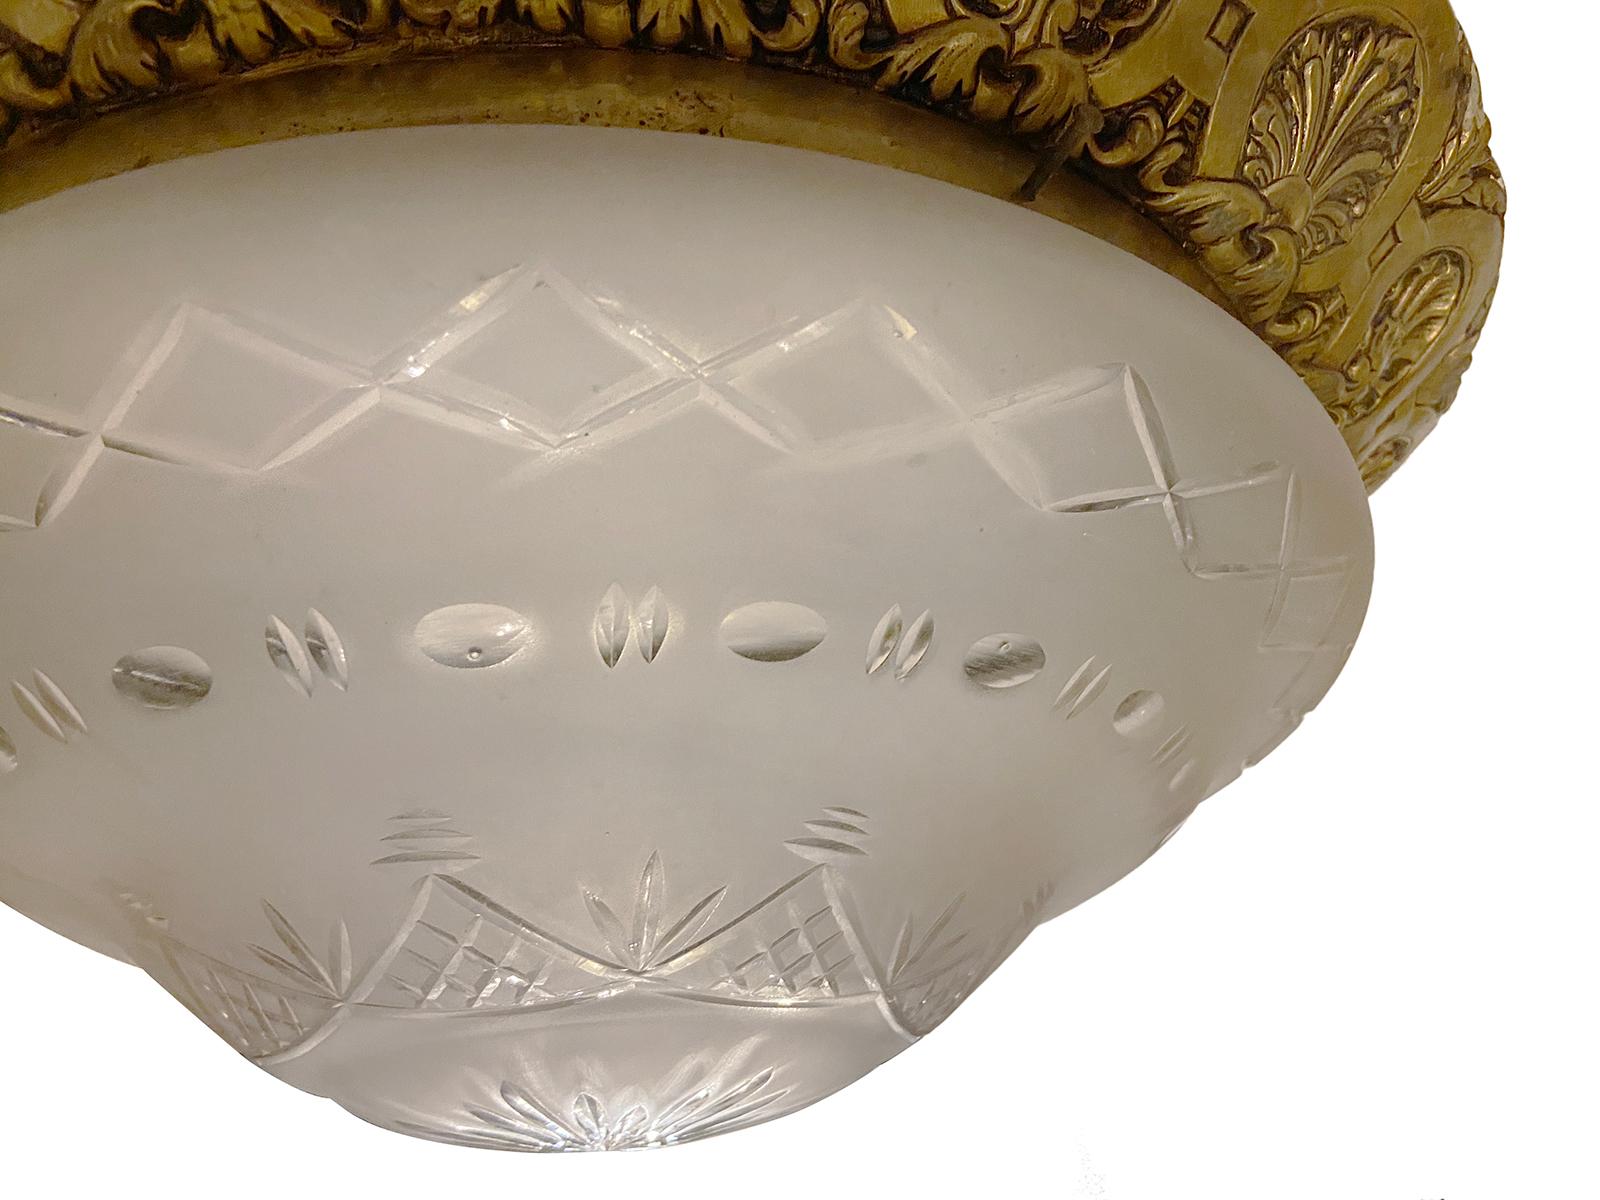 A French circa 1920's cast bronze flush-mounted light fixture with a frosted and cut crystal globe and a shell pattern on the body.

Measurements:
Height 8